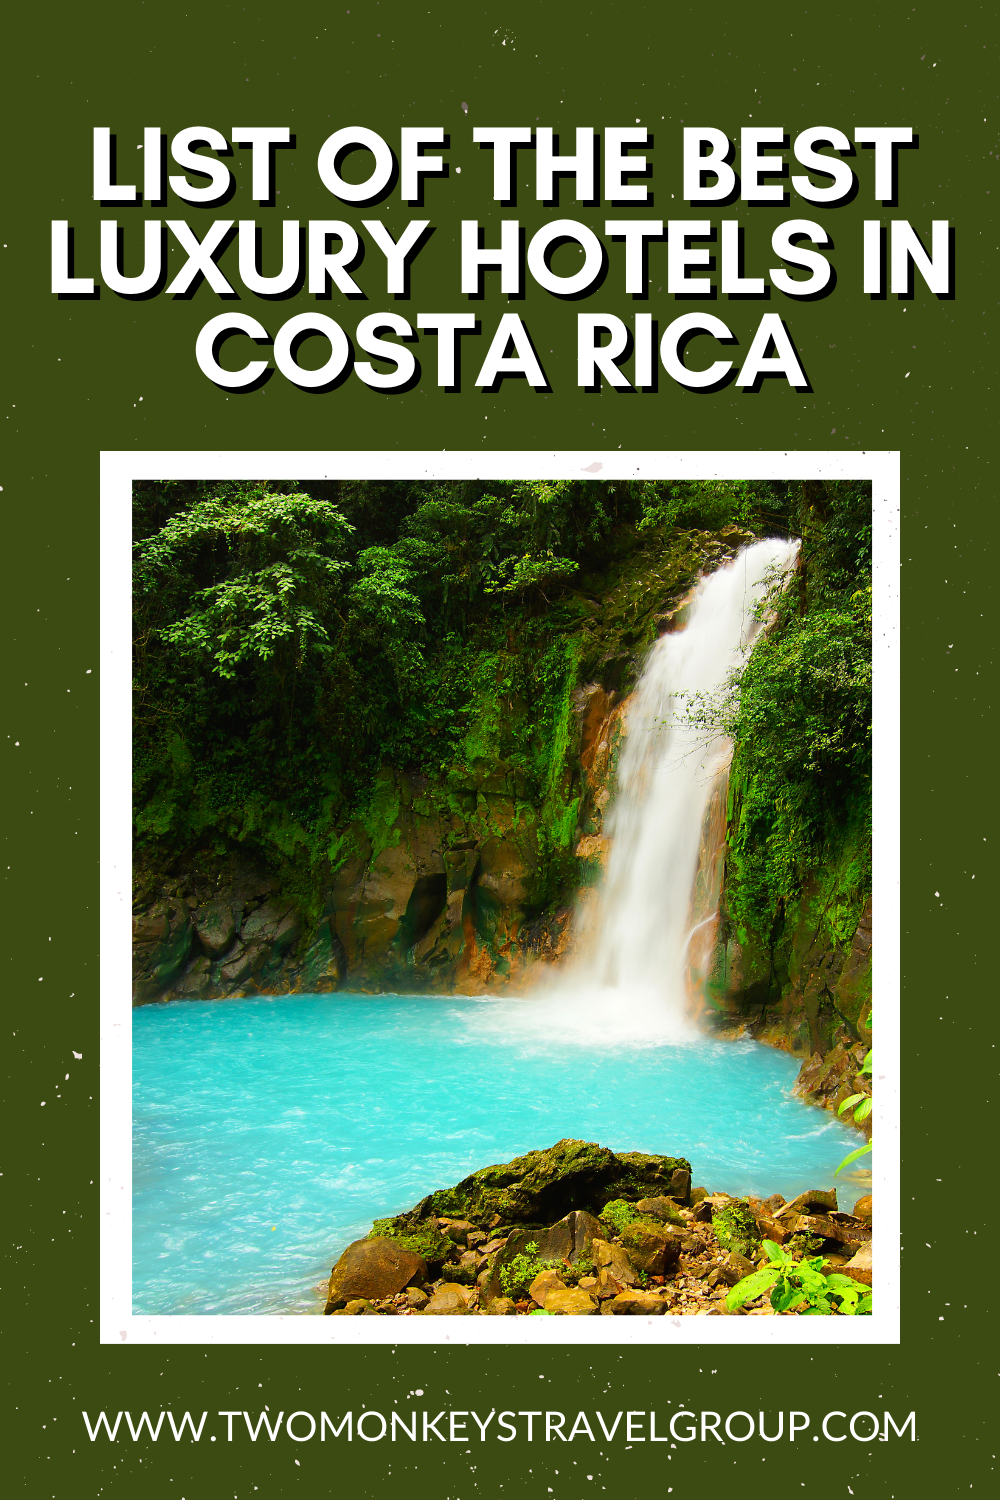 List of the Best Luxury Hotels in Costa Rica